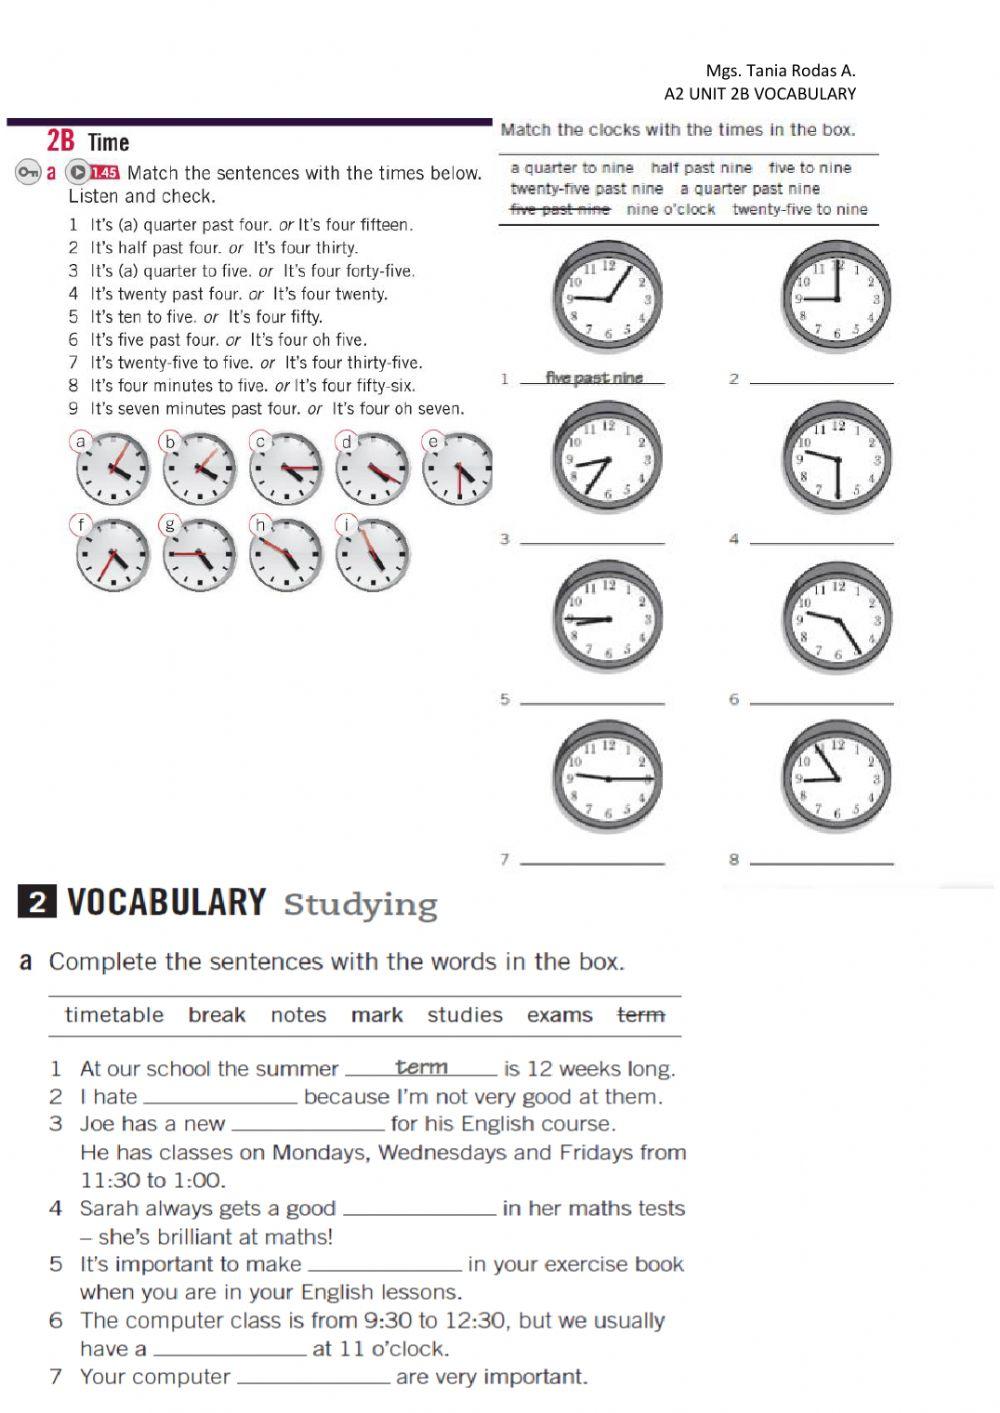 Times and vocabylary for study